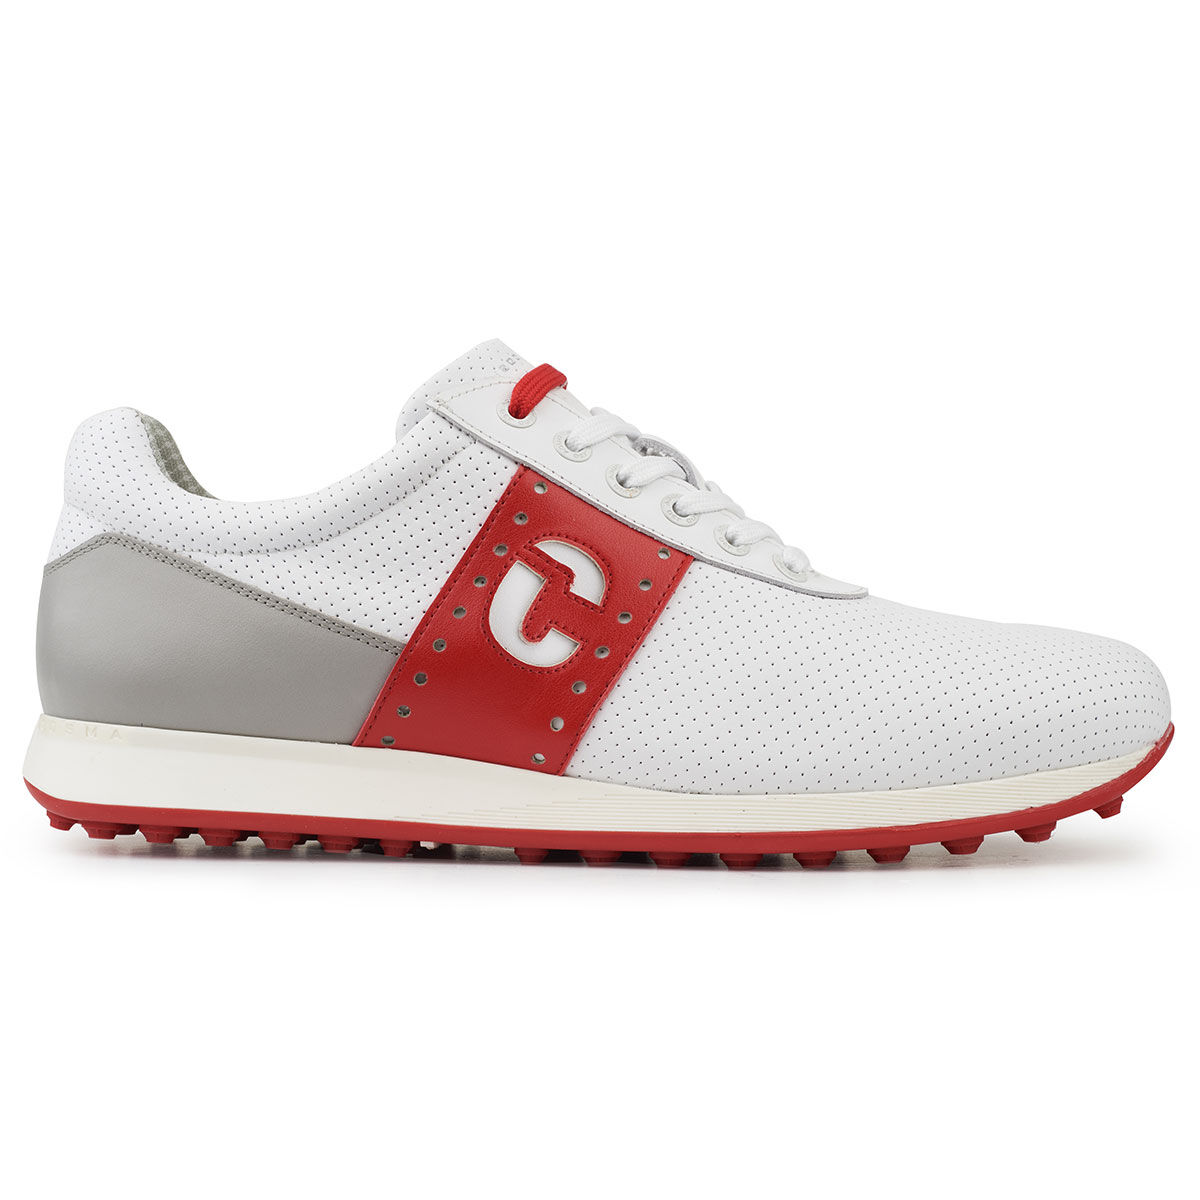 Duca Del Cosma Men’s White, Grey and Red Belair Waterproof Spikeless Golf Shoes, Size: 11 | American Golf